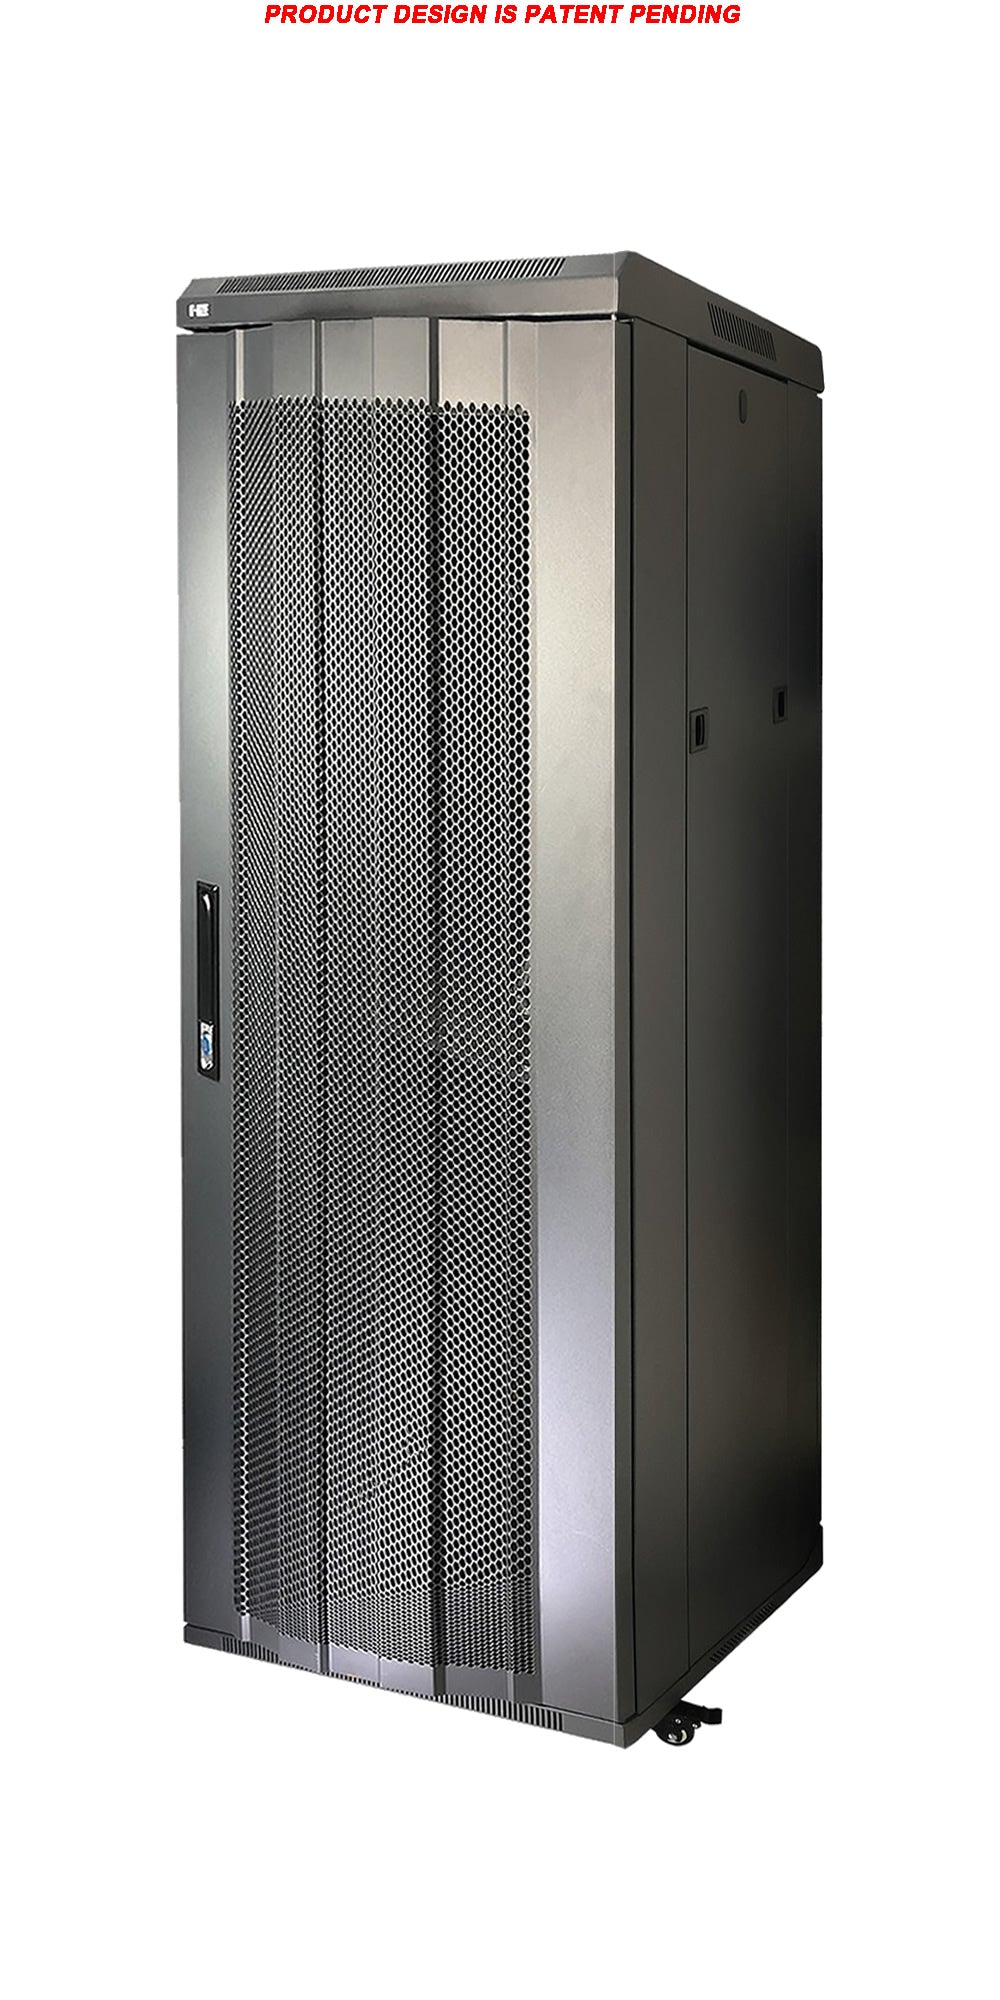 07-6627E 27U Stand Server / Network Cabinet - Extra Deep, Locking Metal Door and Casters with Brake